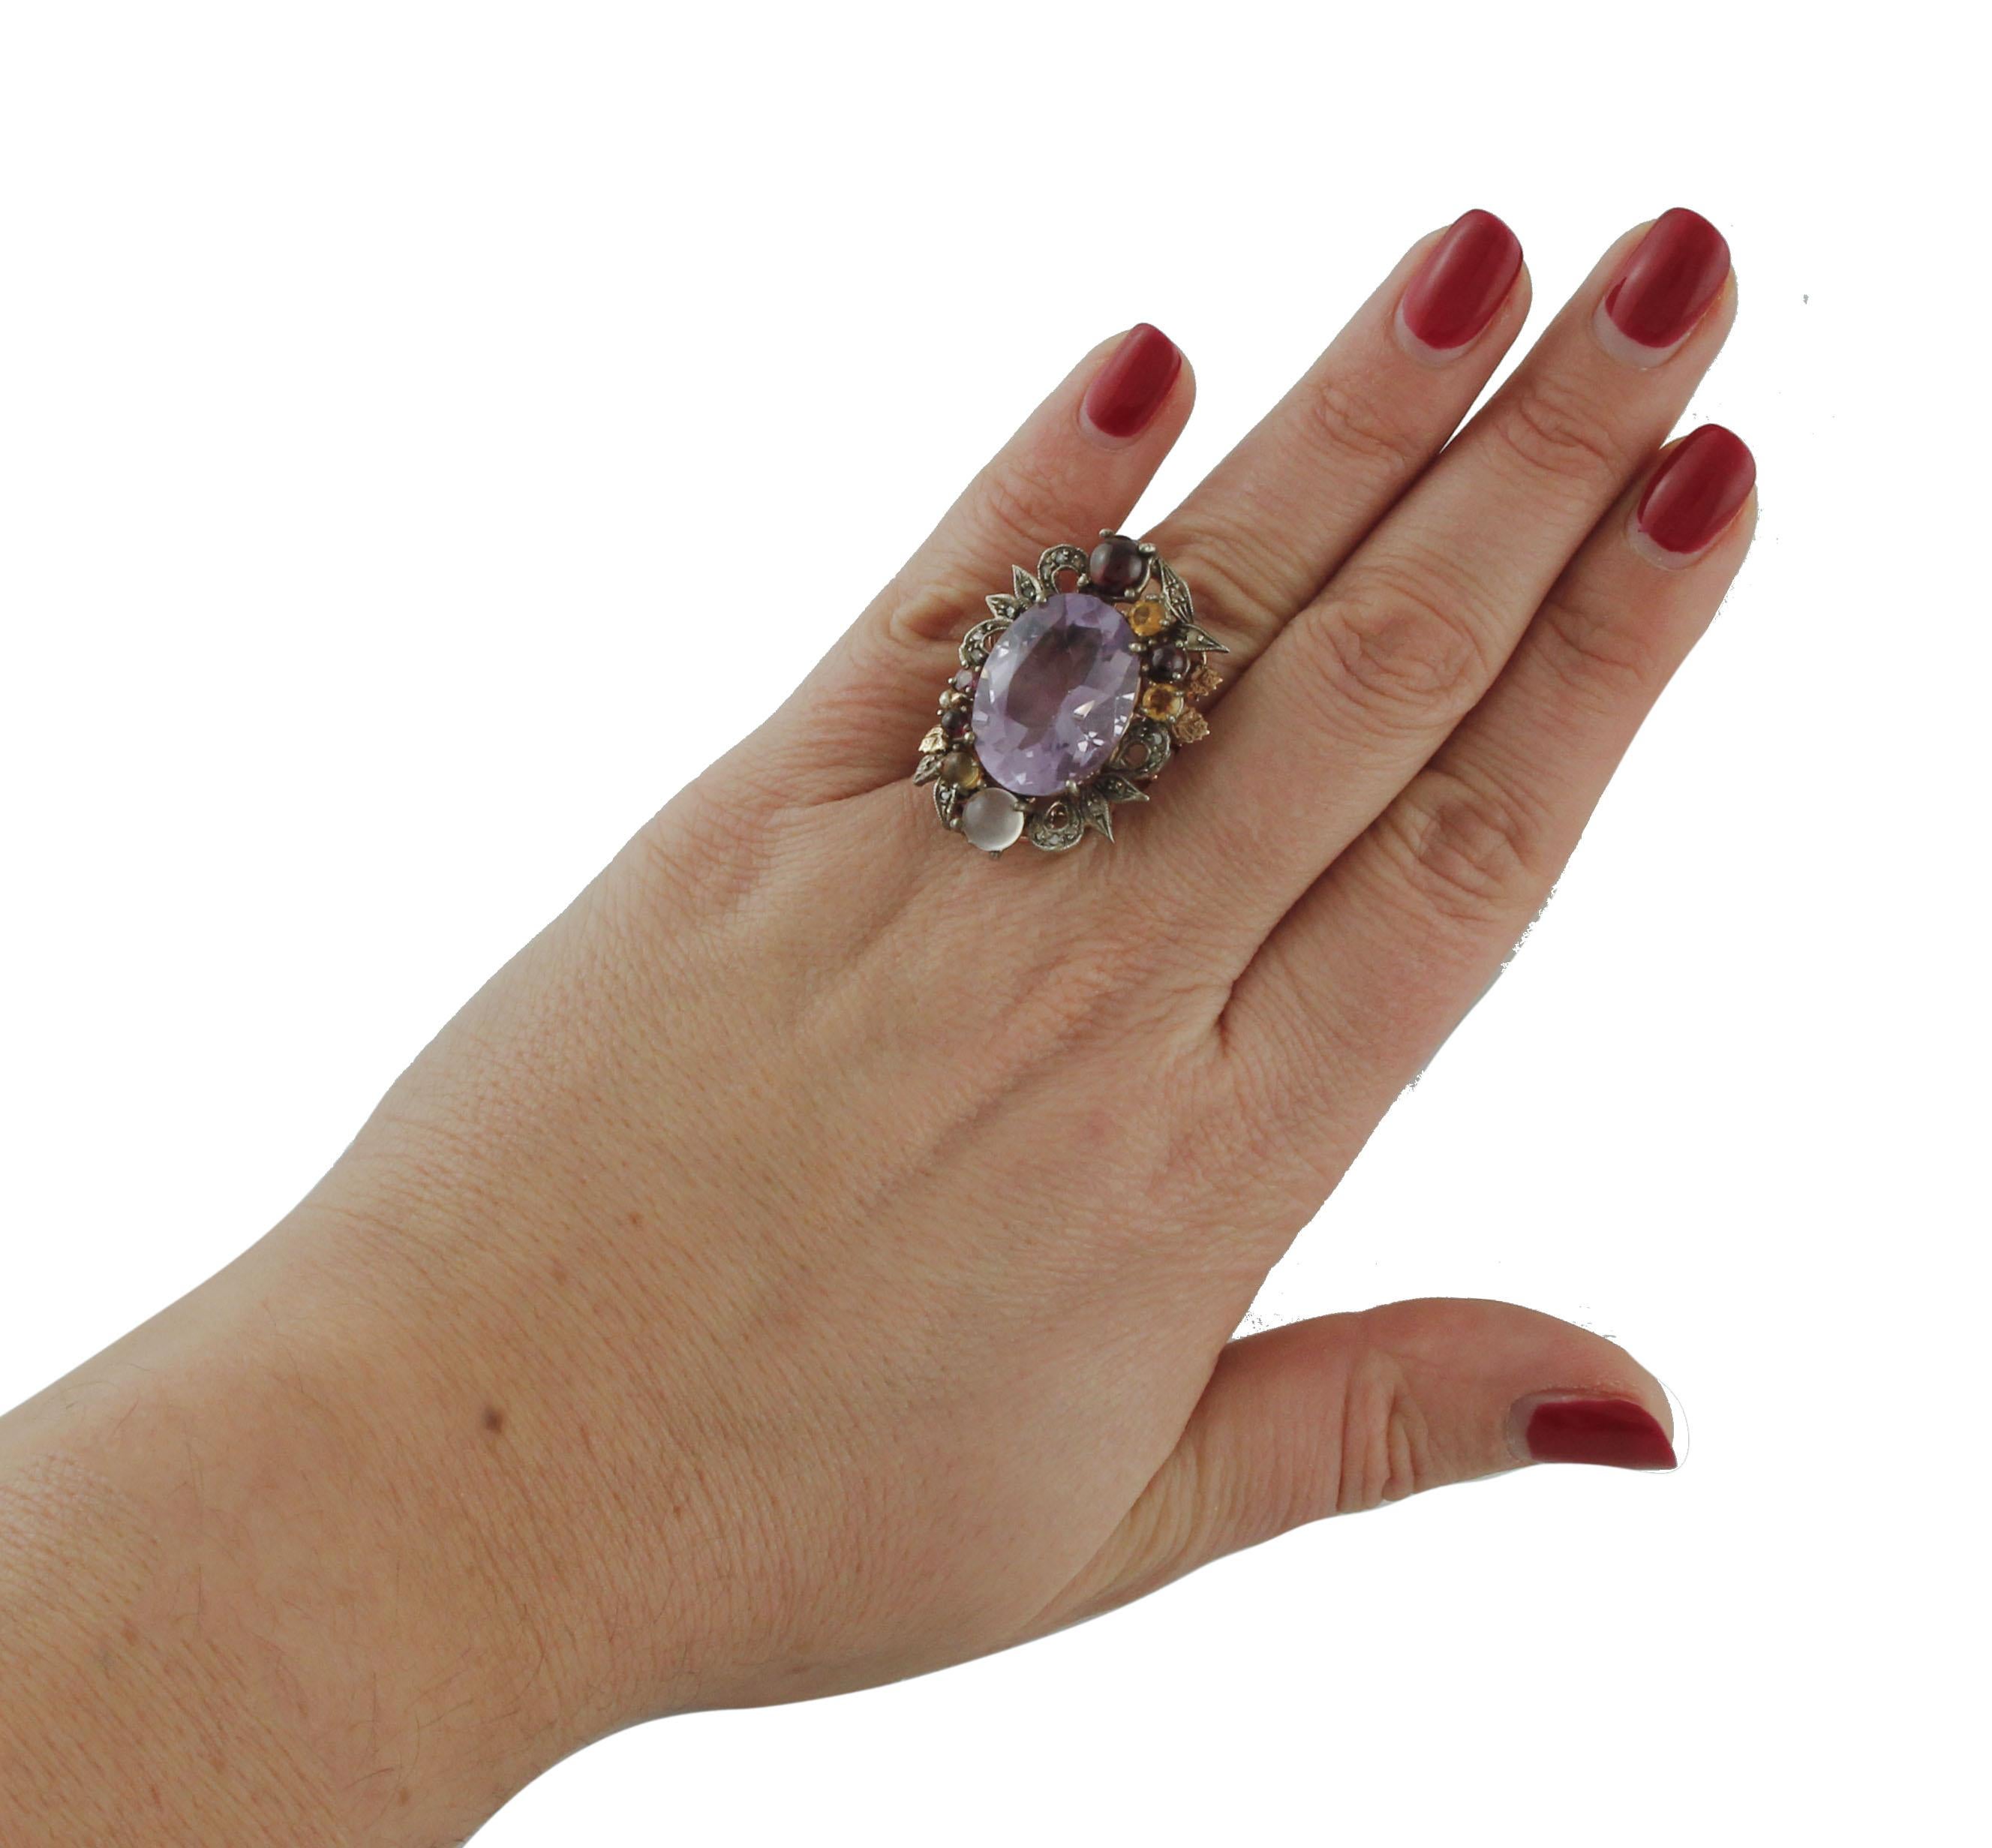 Diamonds Amethyst Yellow Topazes, Garnets Moonstone Rose Gold and Silver Ring 1